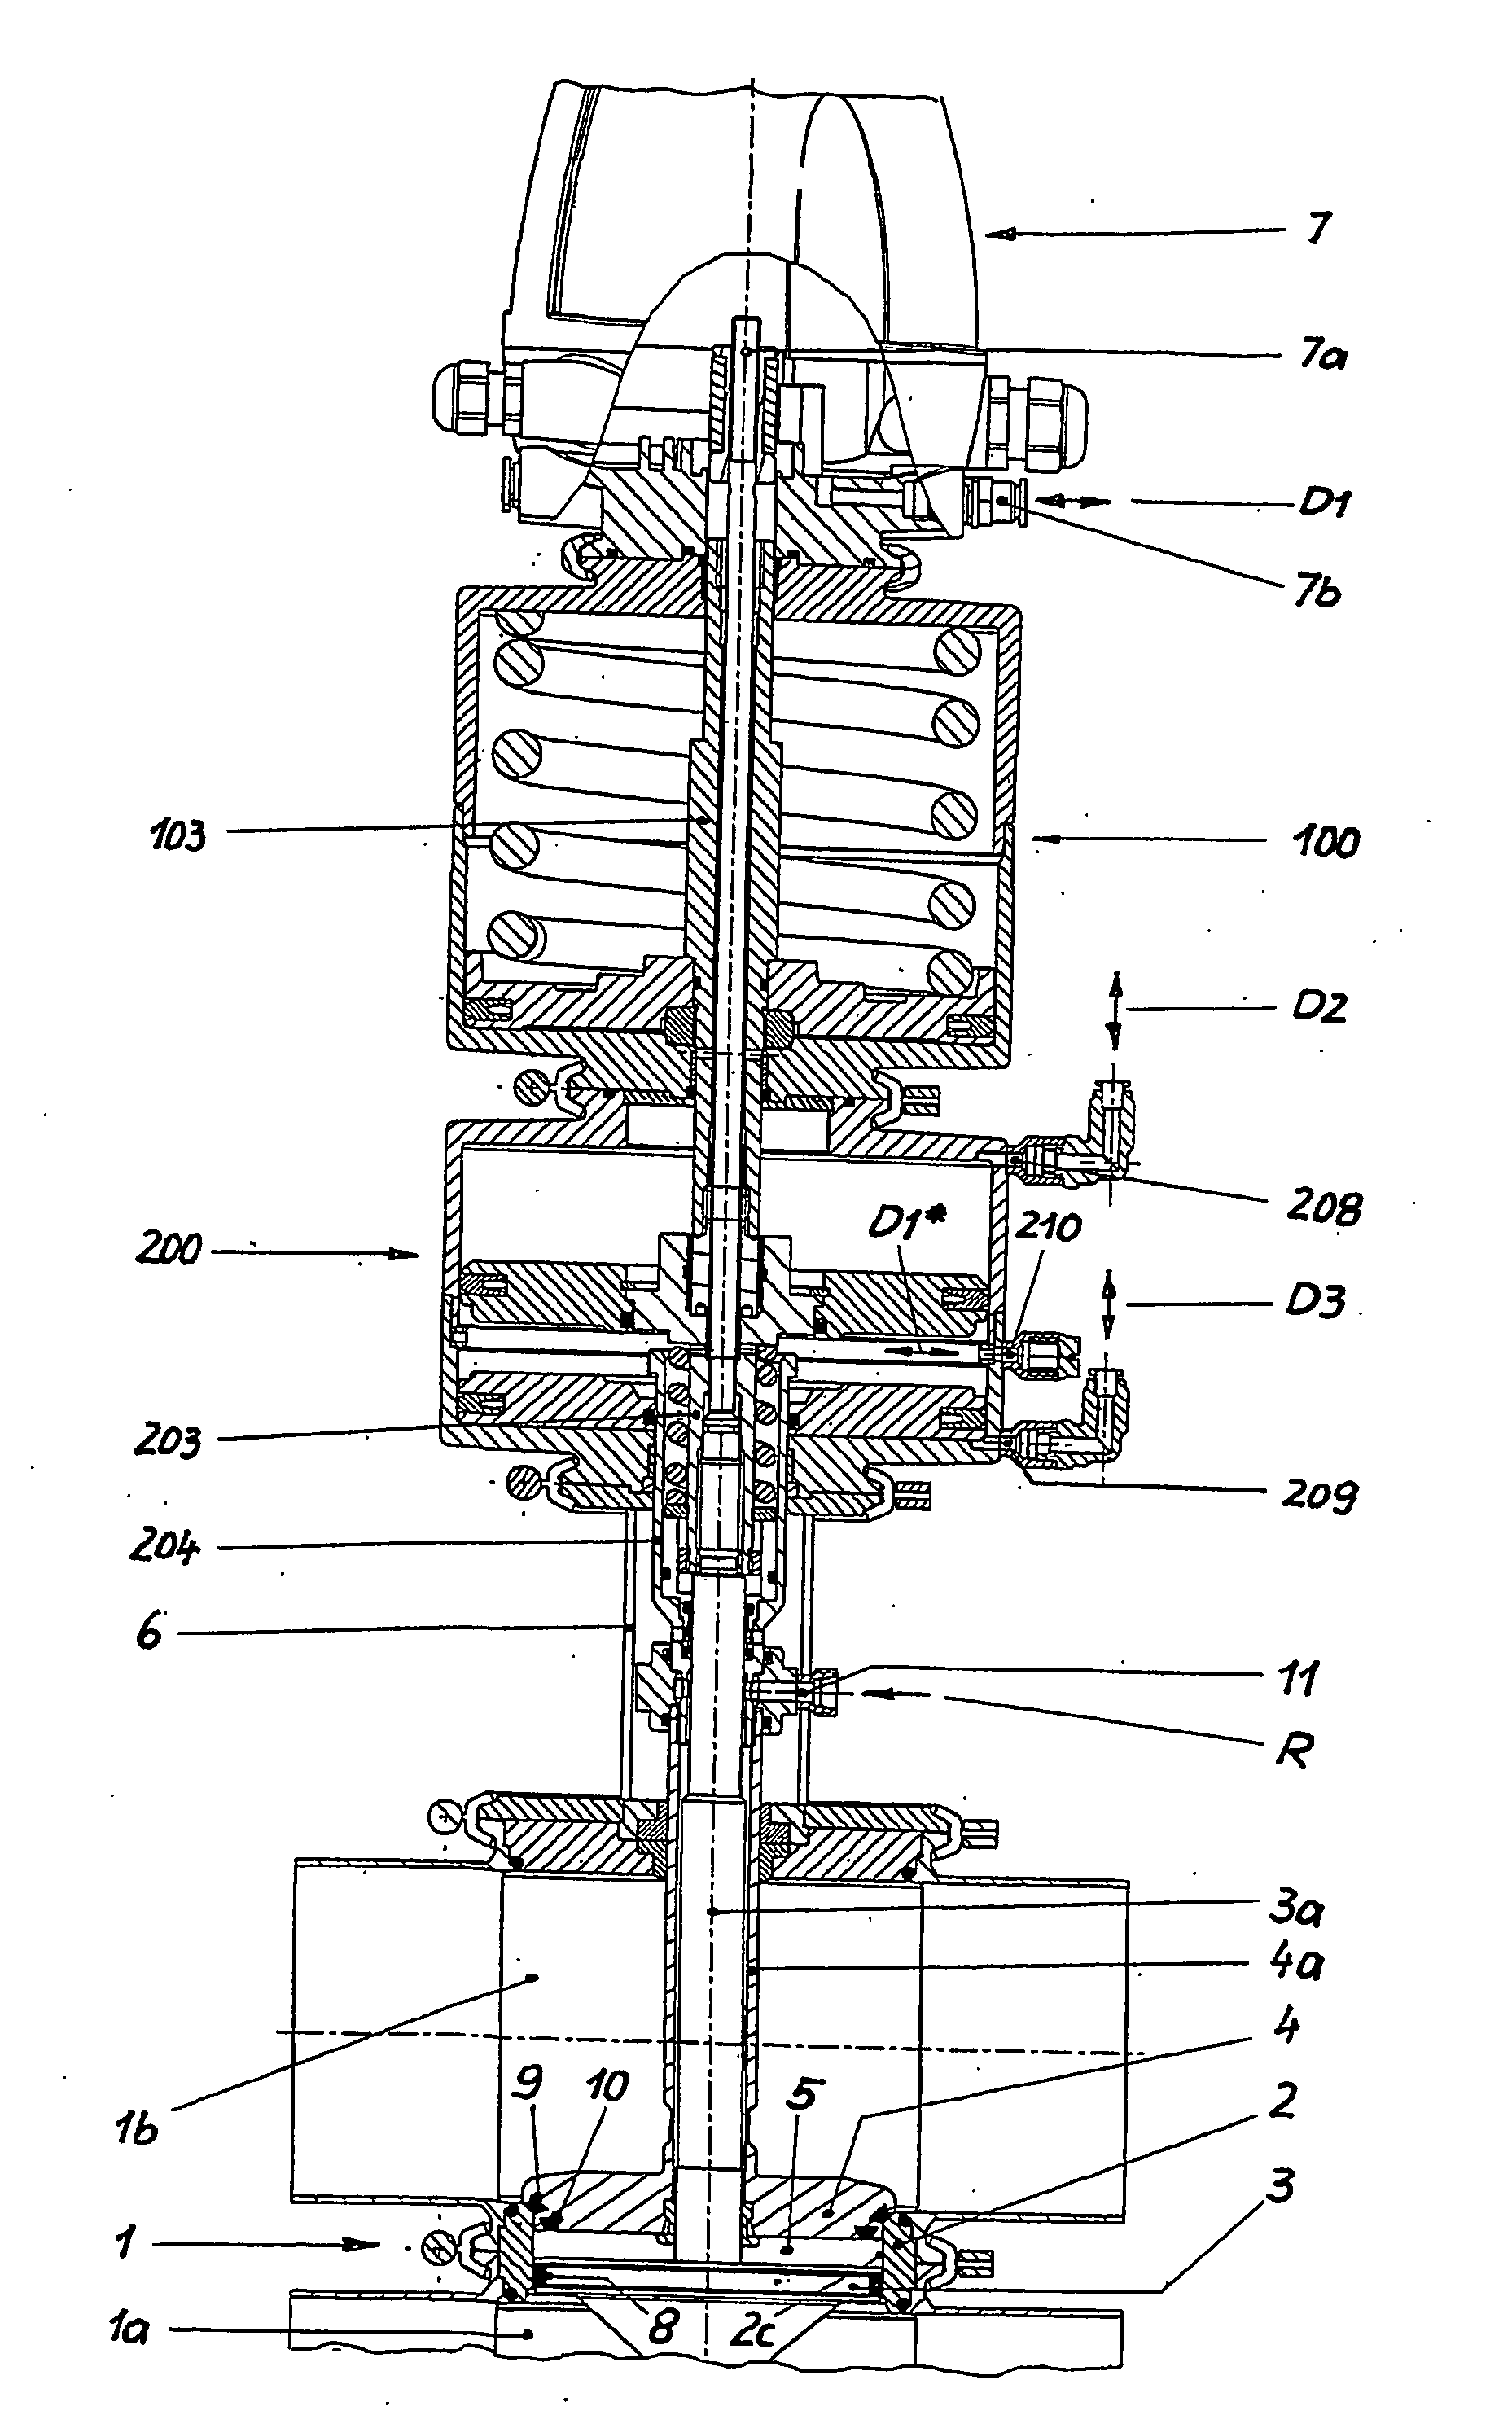 Device for actuating double seat valves